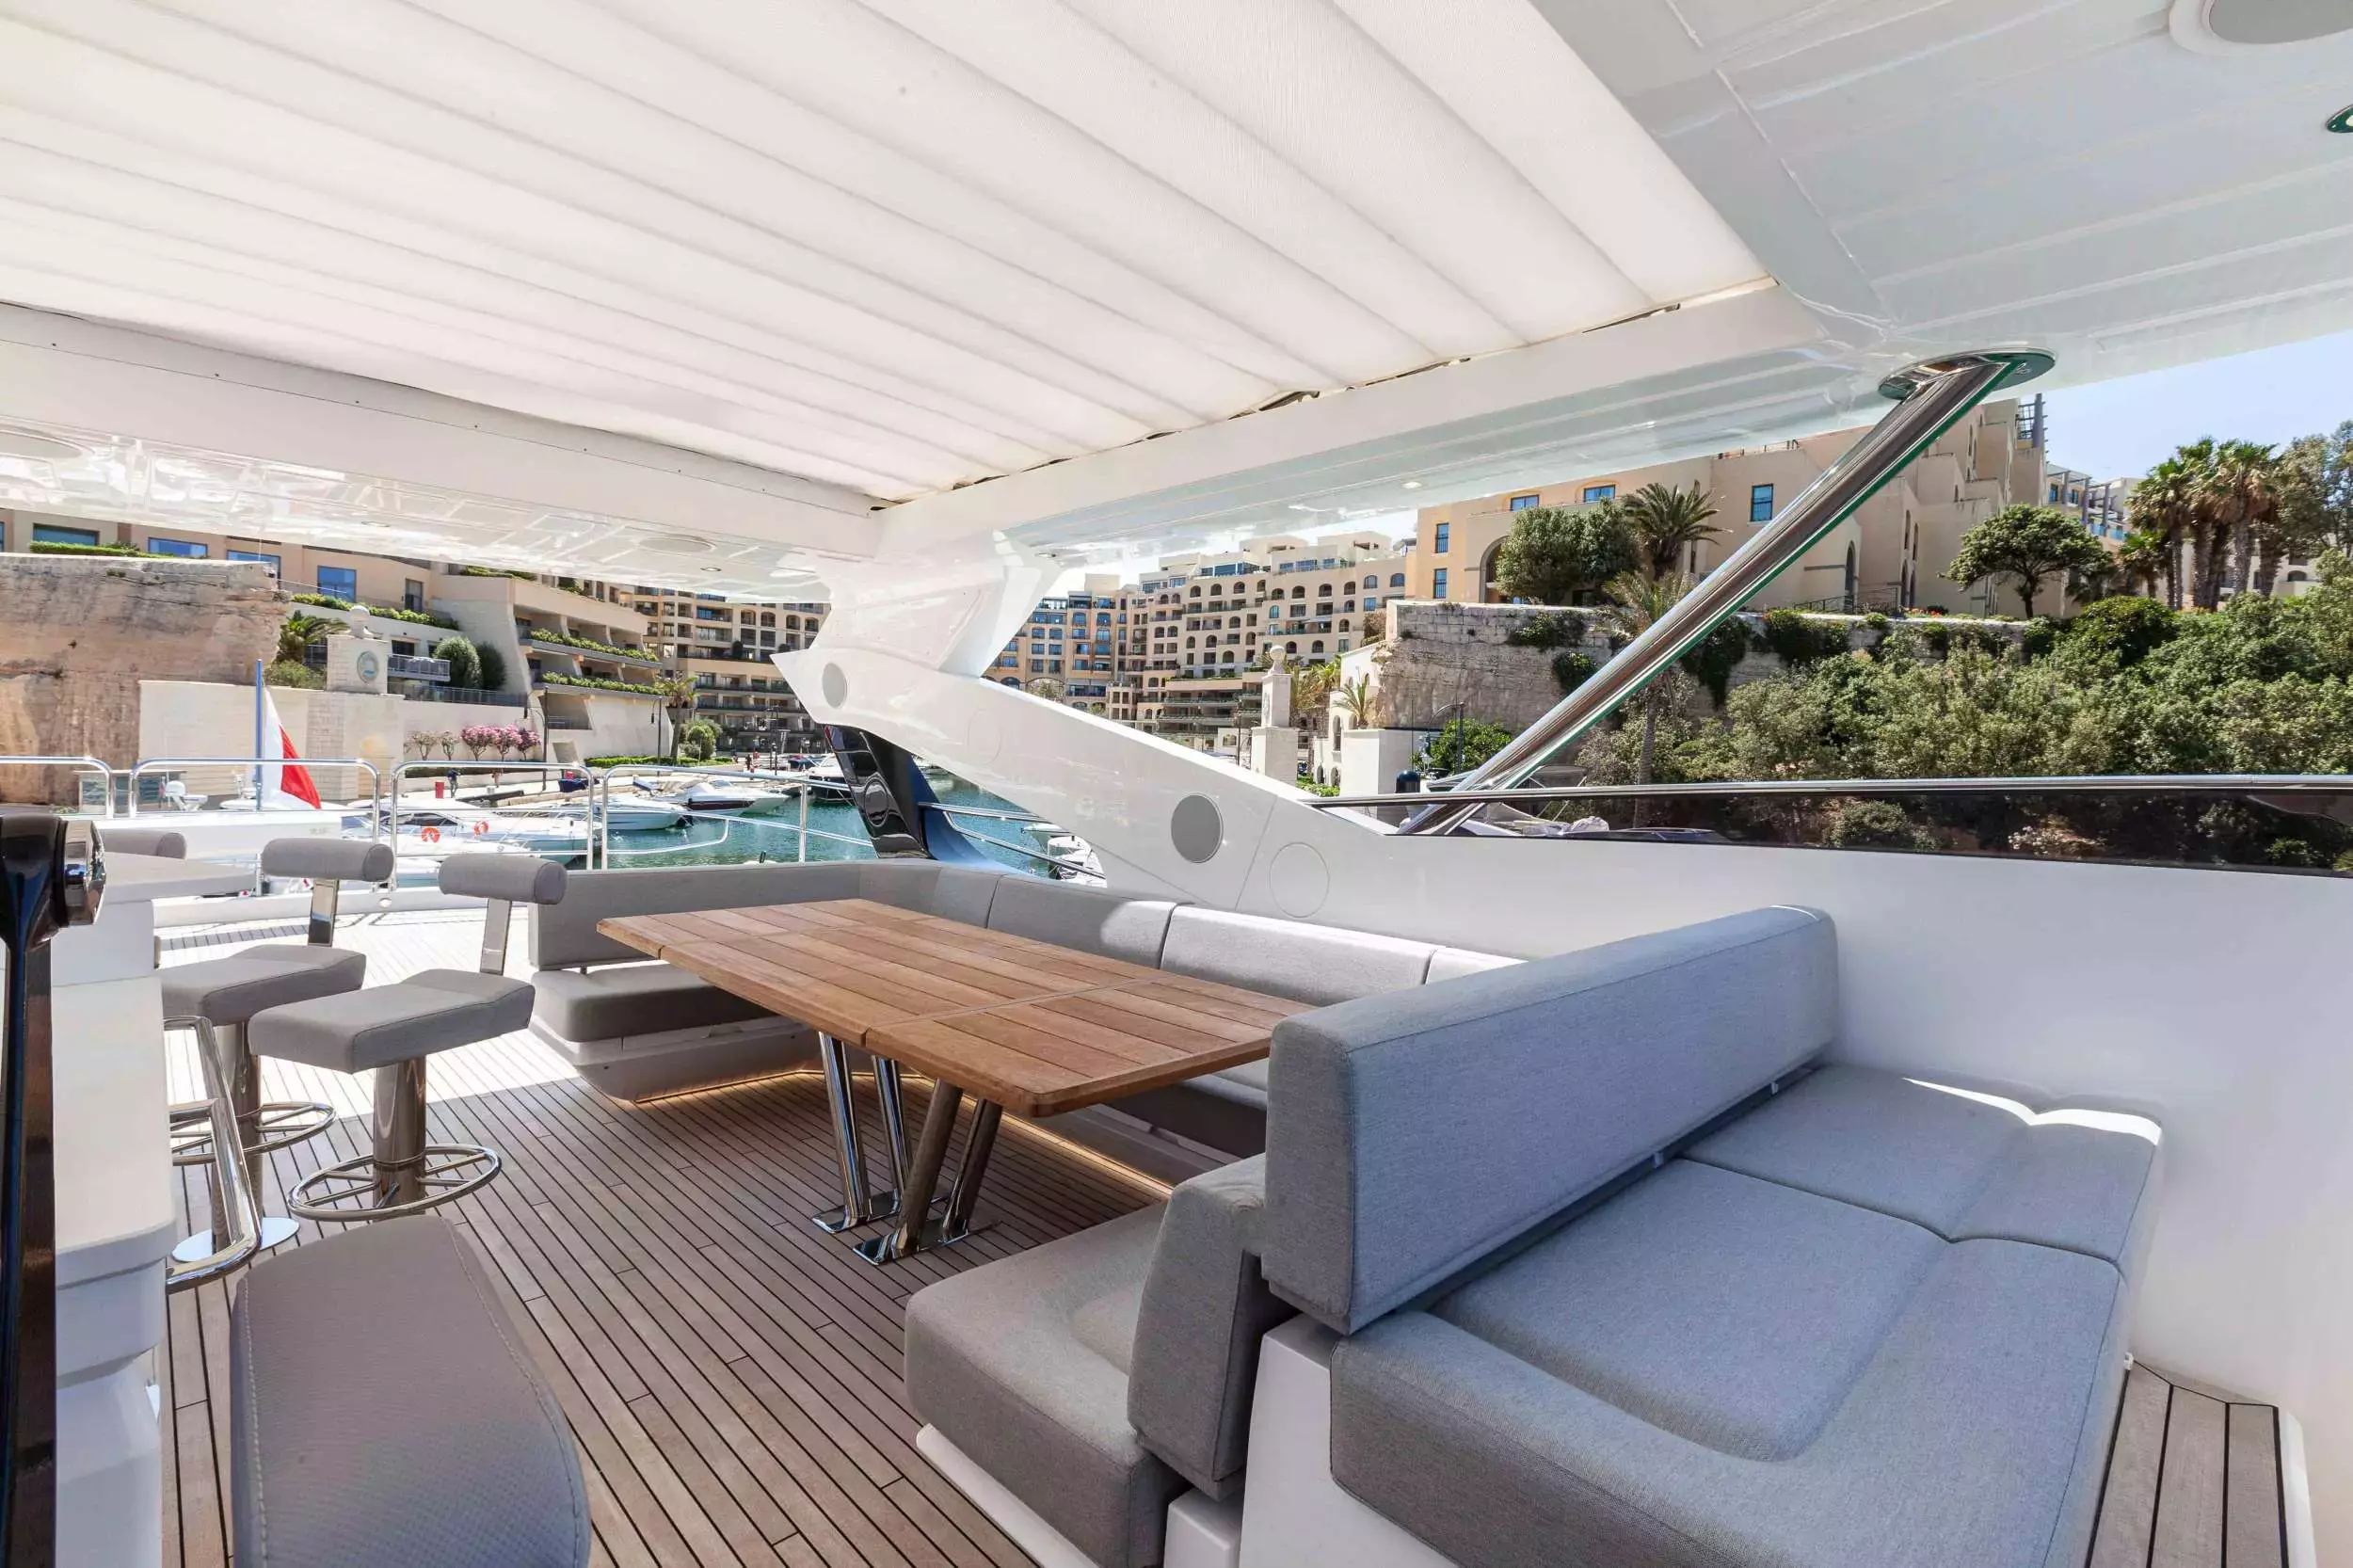 New Edge by Sunseeker - Top rates for a Charter of a private Superyacht in Cyprus